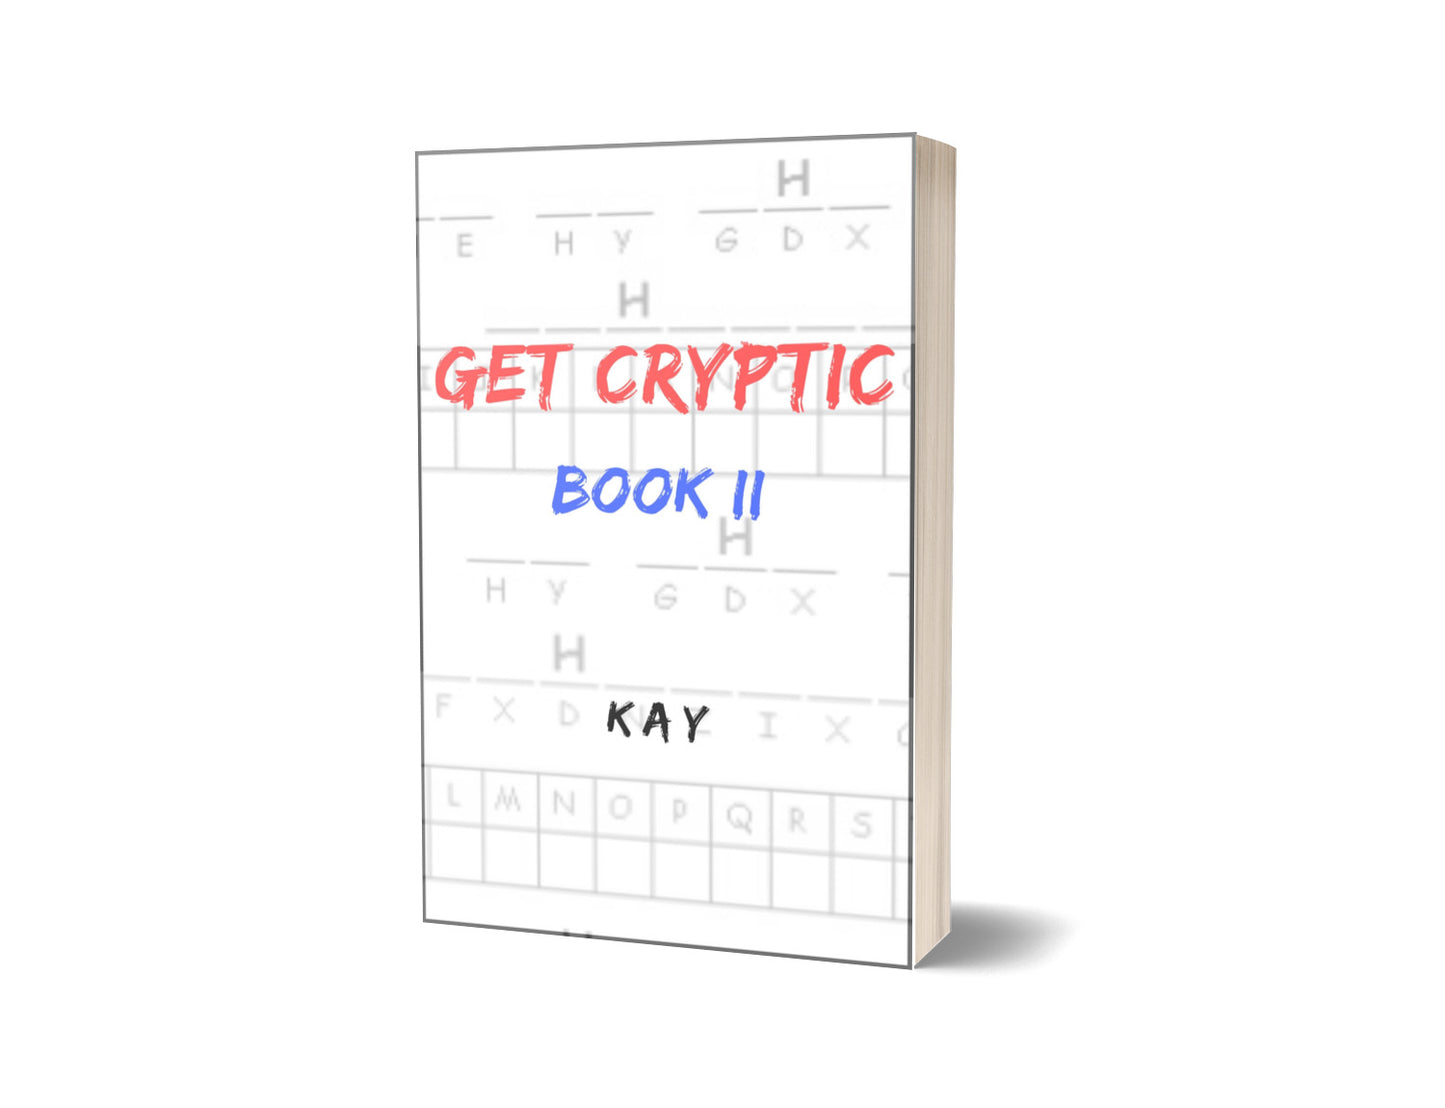 Get Cryptic Book II